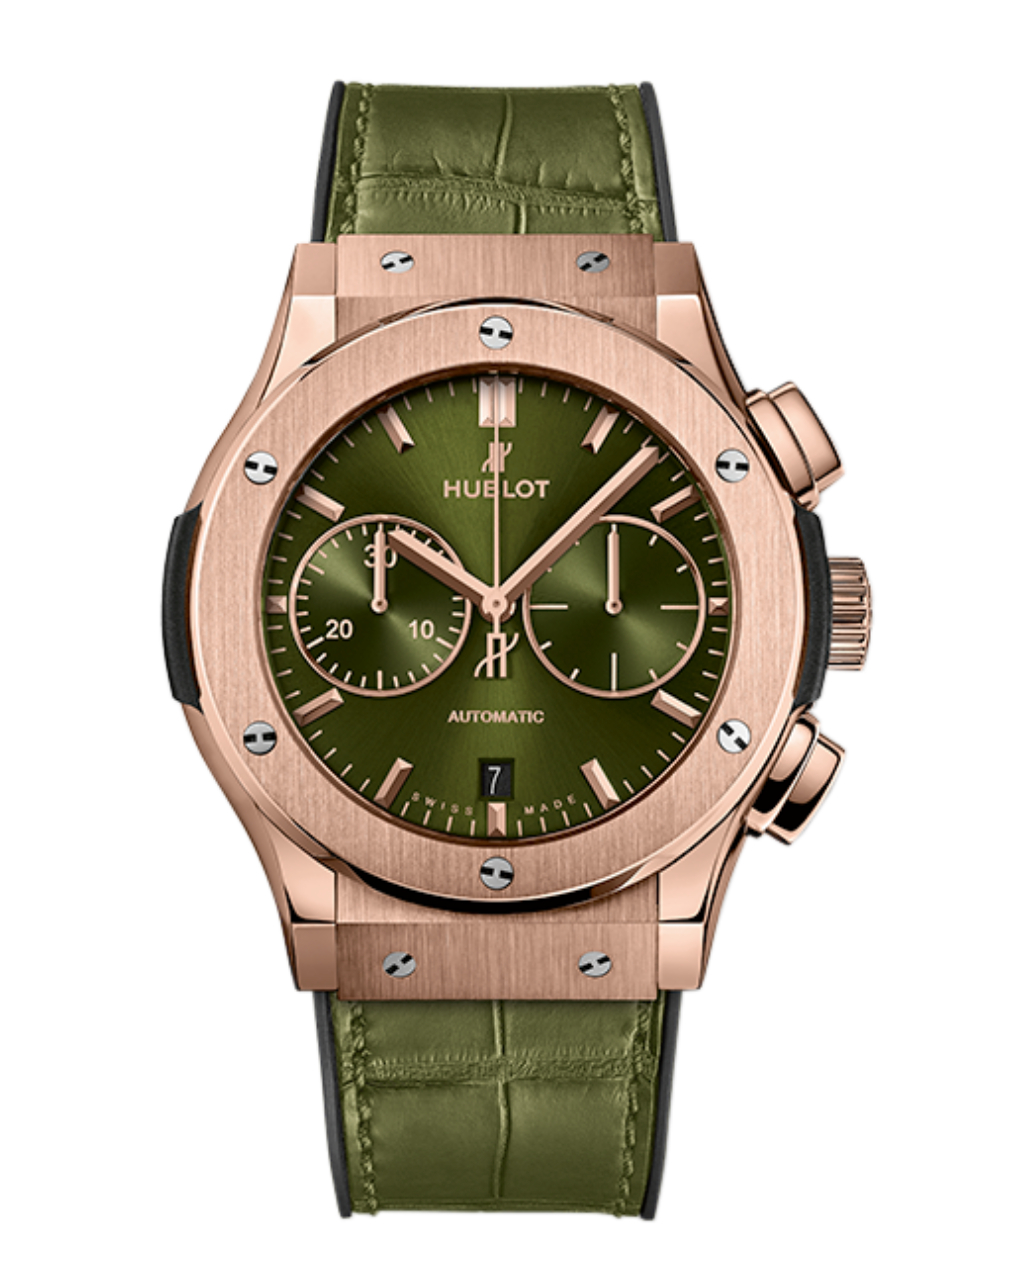 Classic Fusion Chronograph King Gold Green 45mm 521.OX.8980.LR